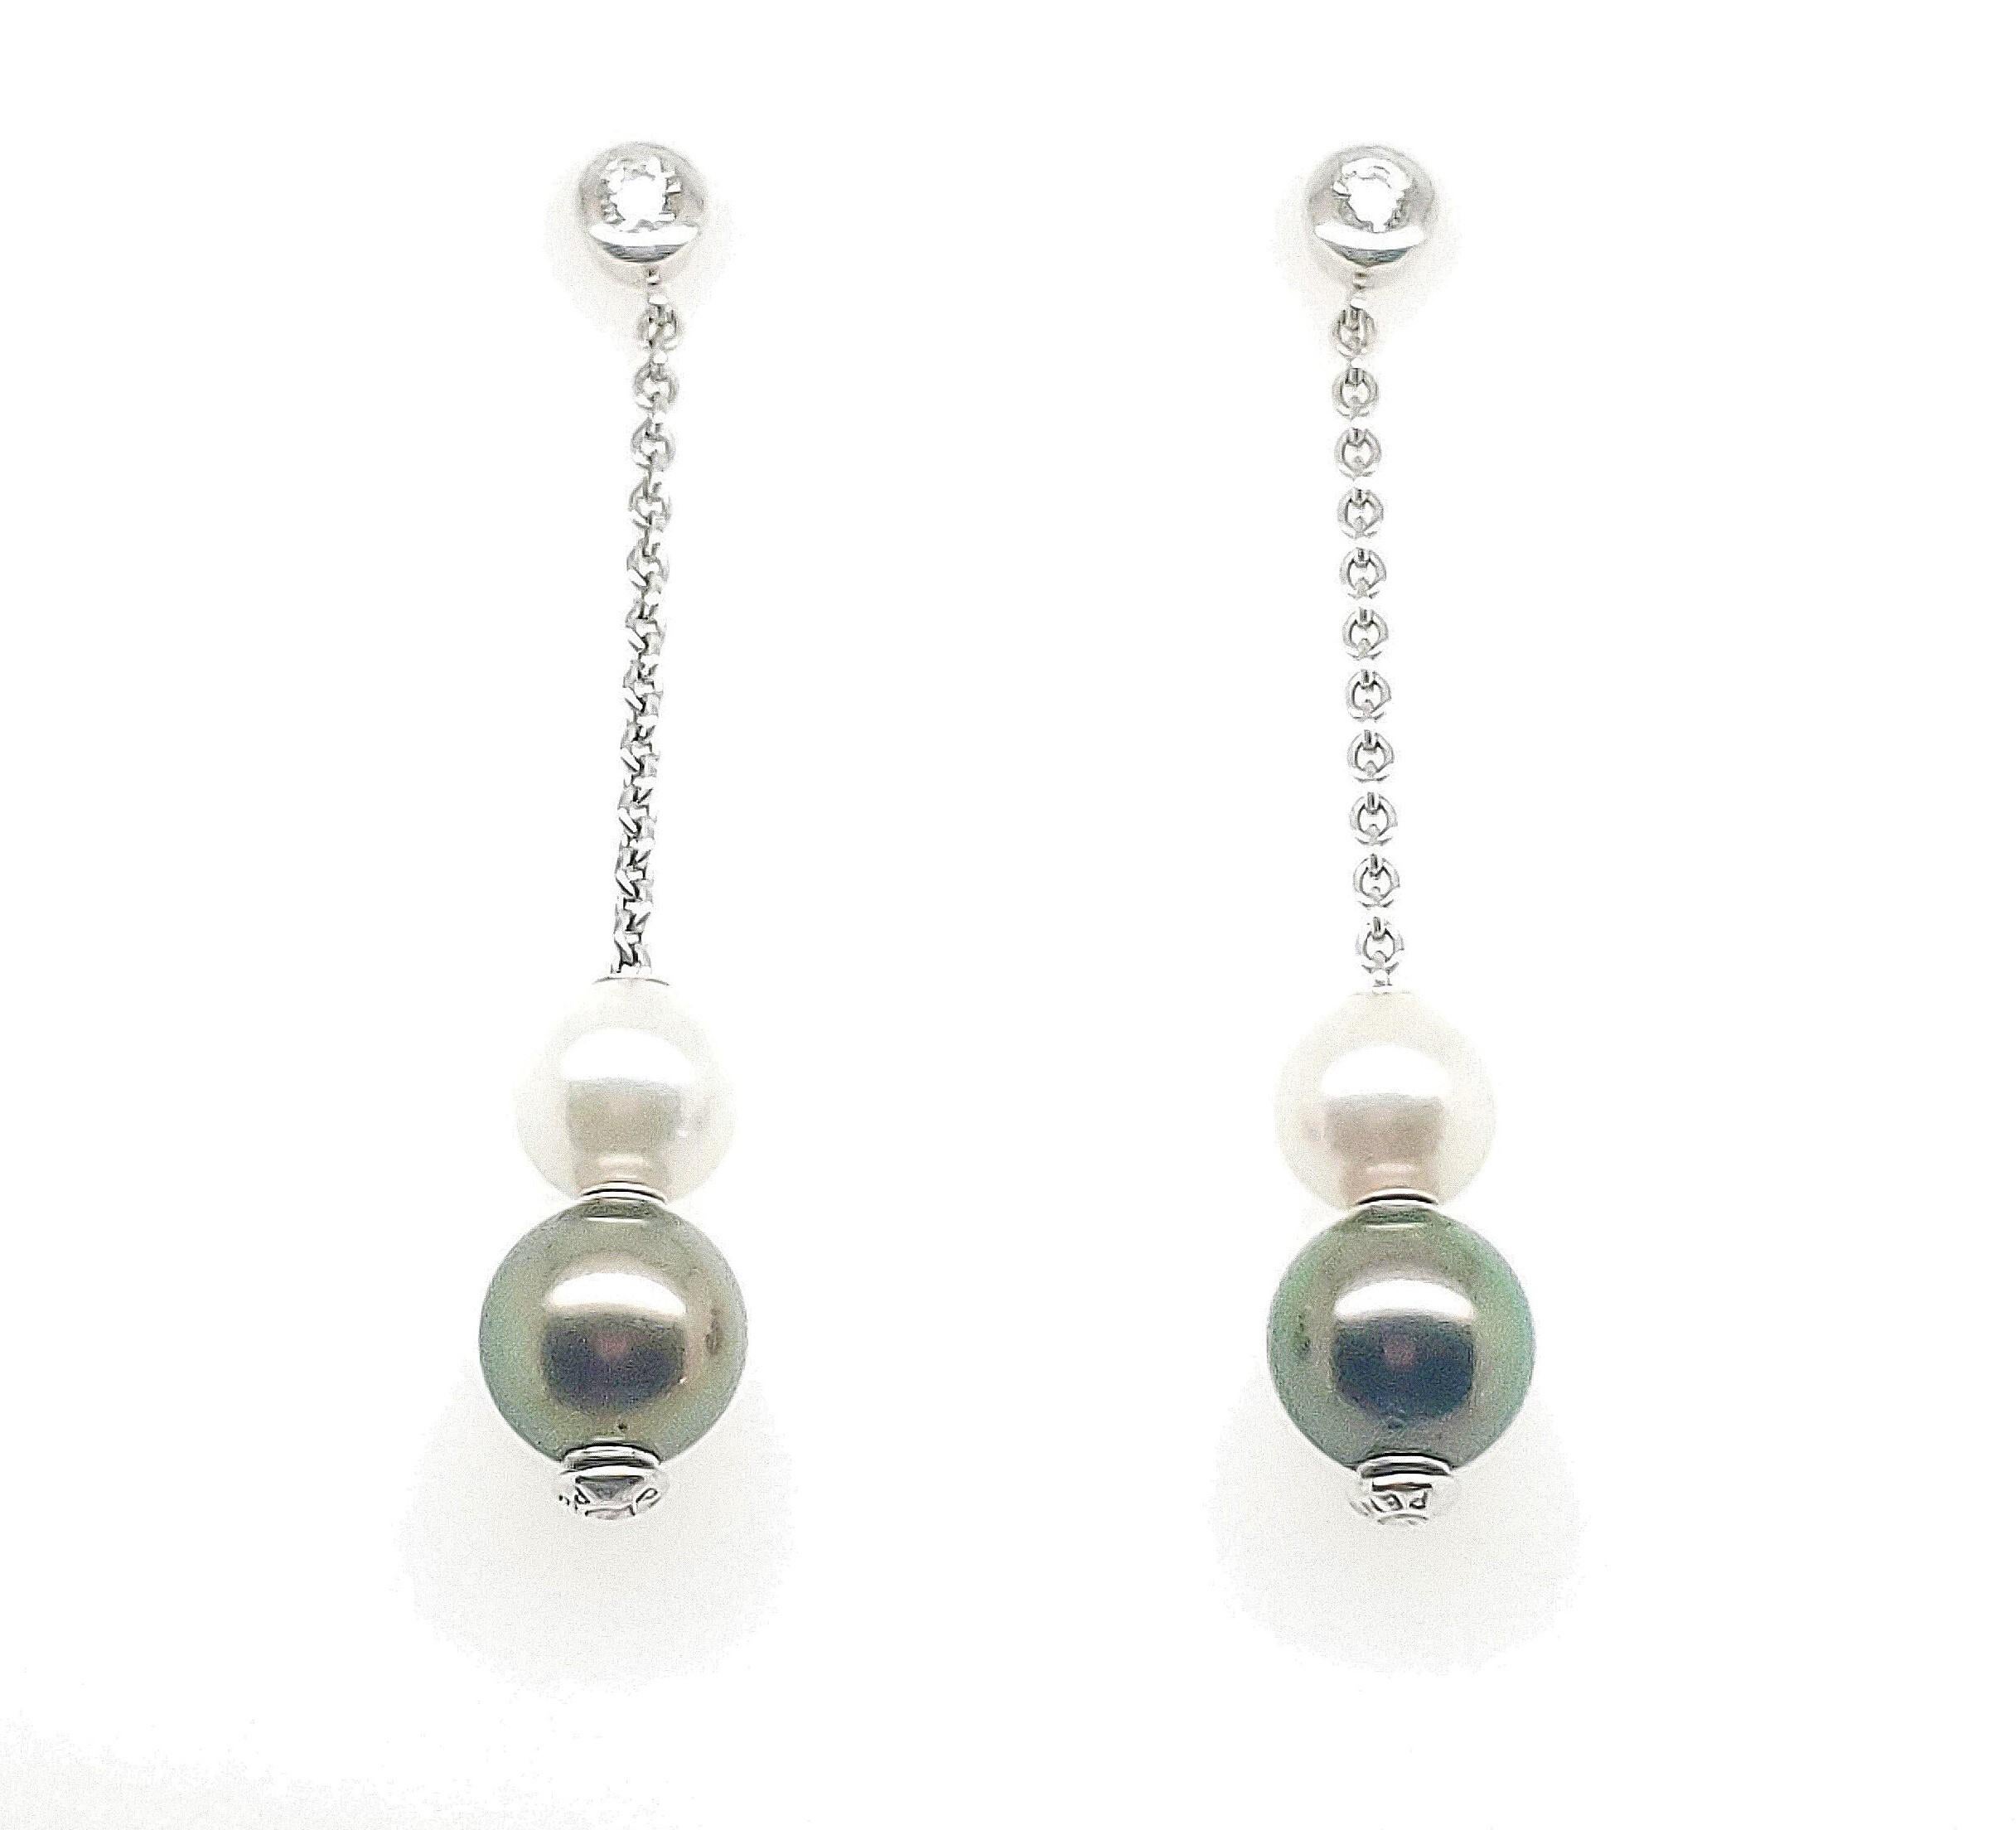 Authentic Mikimoto Pearls in Motion earrings made in 18 karat white gold with 2 round brilliant diamonds, 2 black south sea pearls measuring 8mm each, and 2 white south sea pearls measuring 7mm each.  The pearls can slide up or down on the white